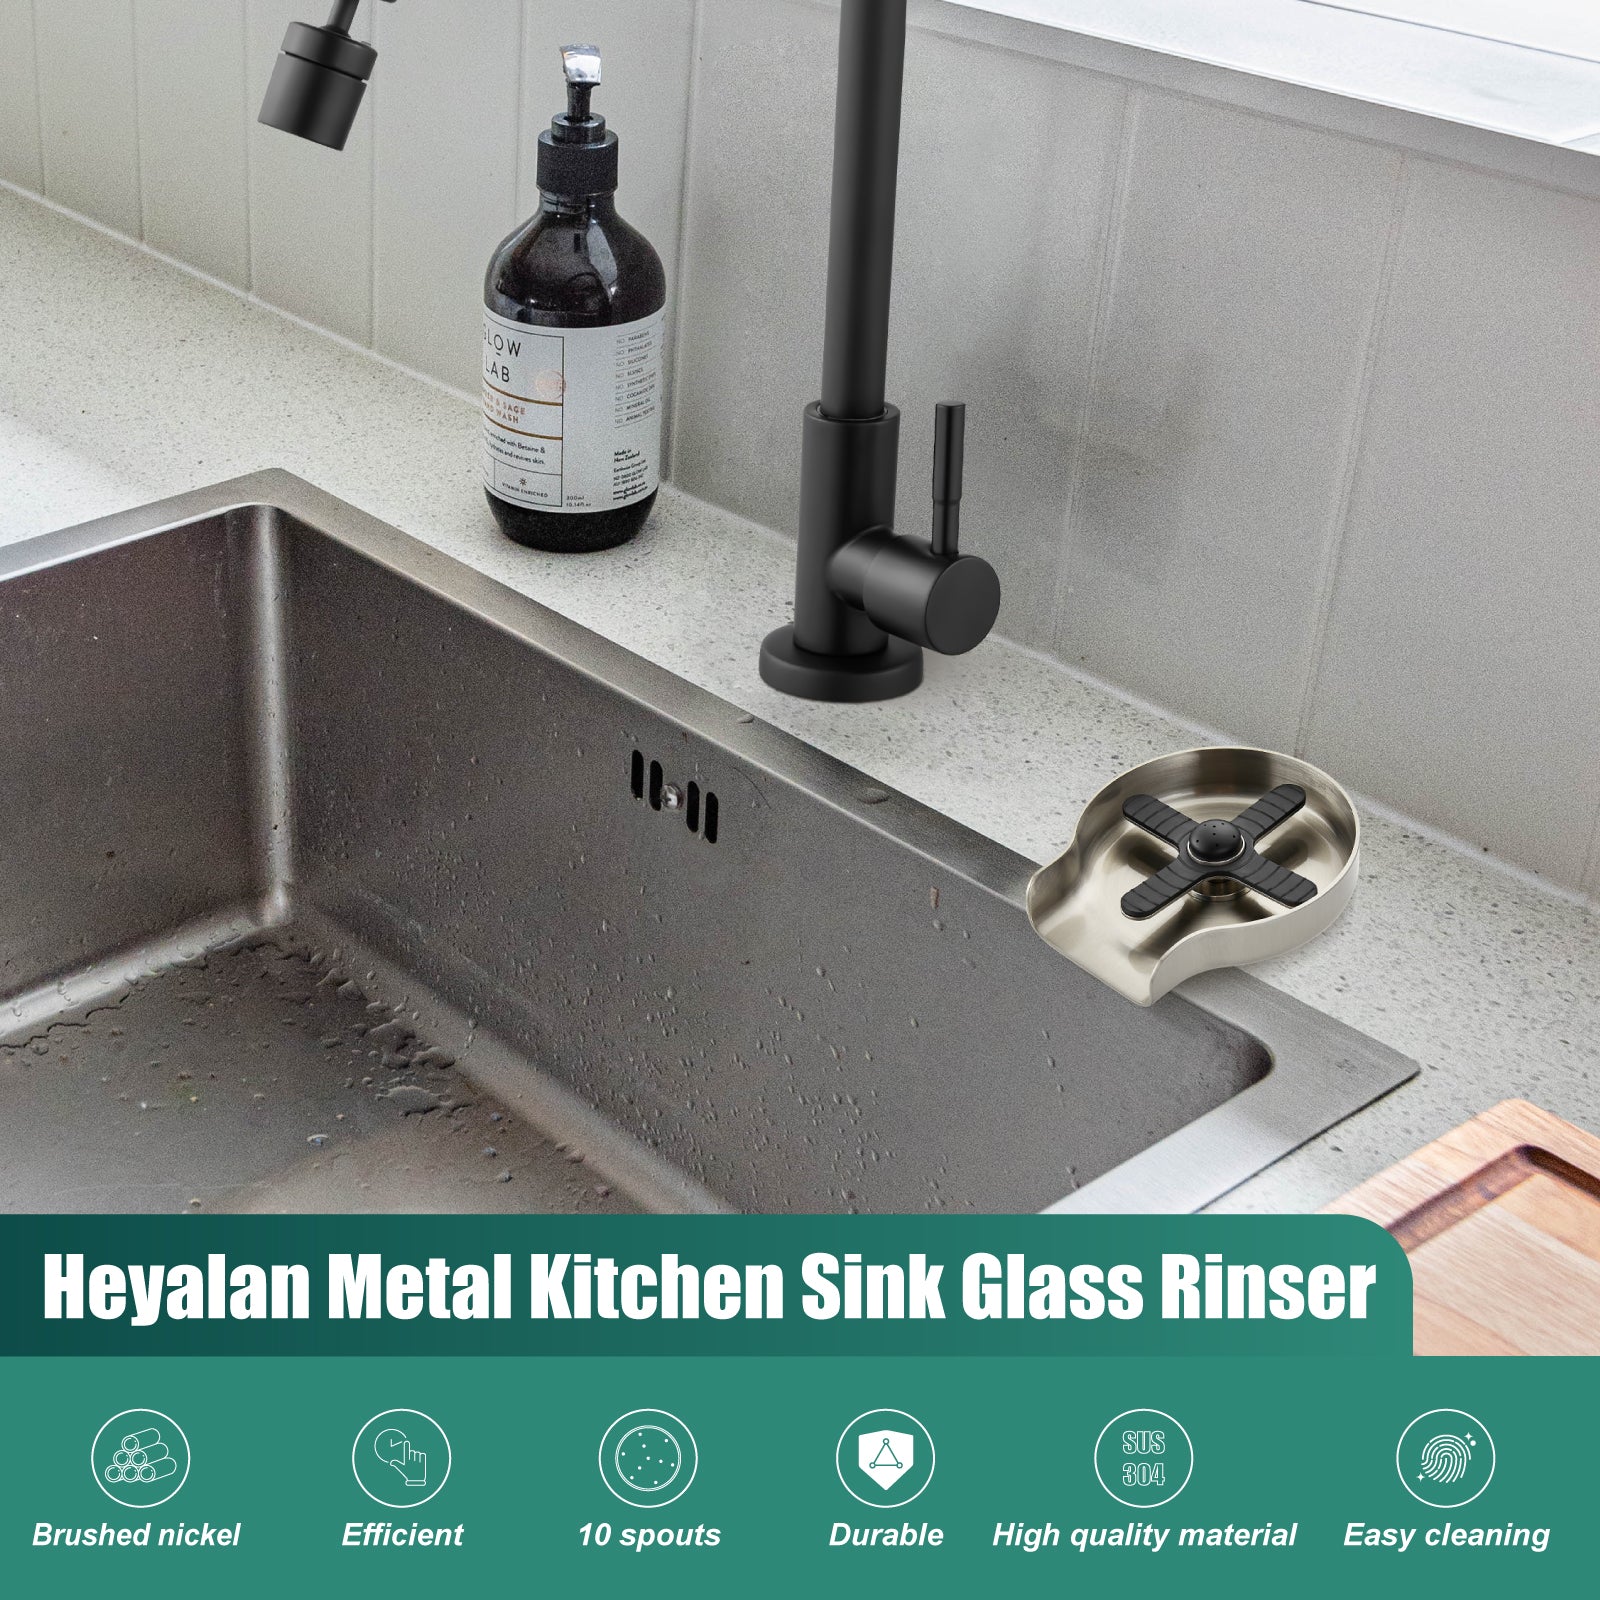 Heyalan Kitchen Sink Faucet Glass Rinser, Automatic Stainless Steel Sink Cup Rinser Bottle Washer, Sink Accessories for Kitchen, Bar Cup Cleaner Attachment